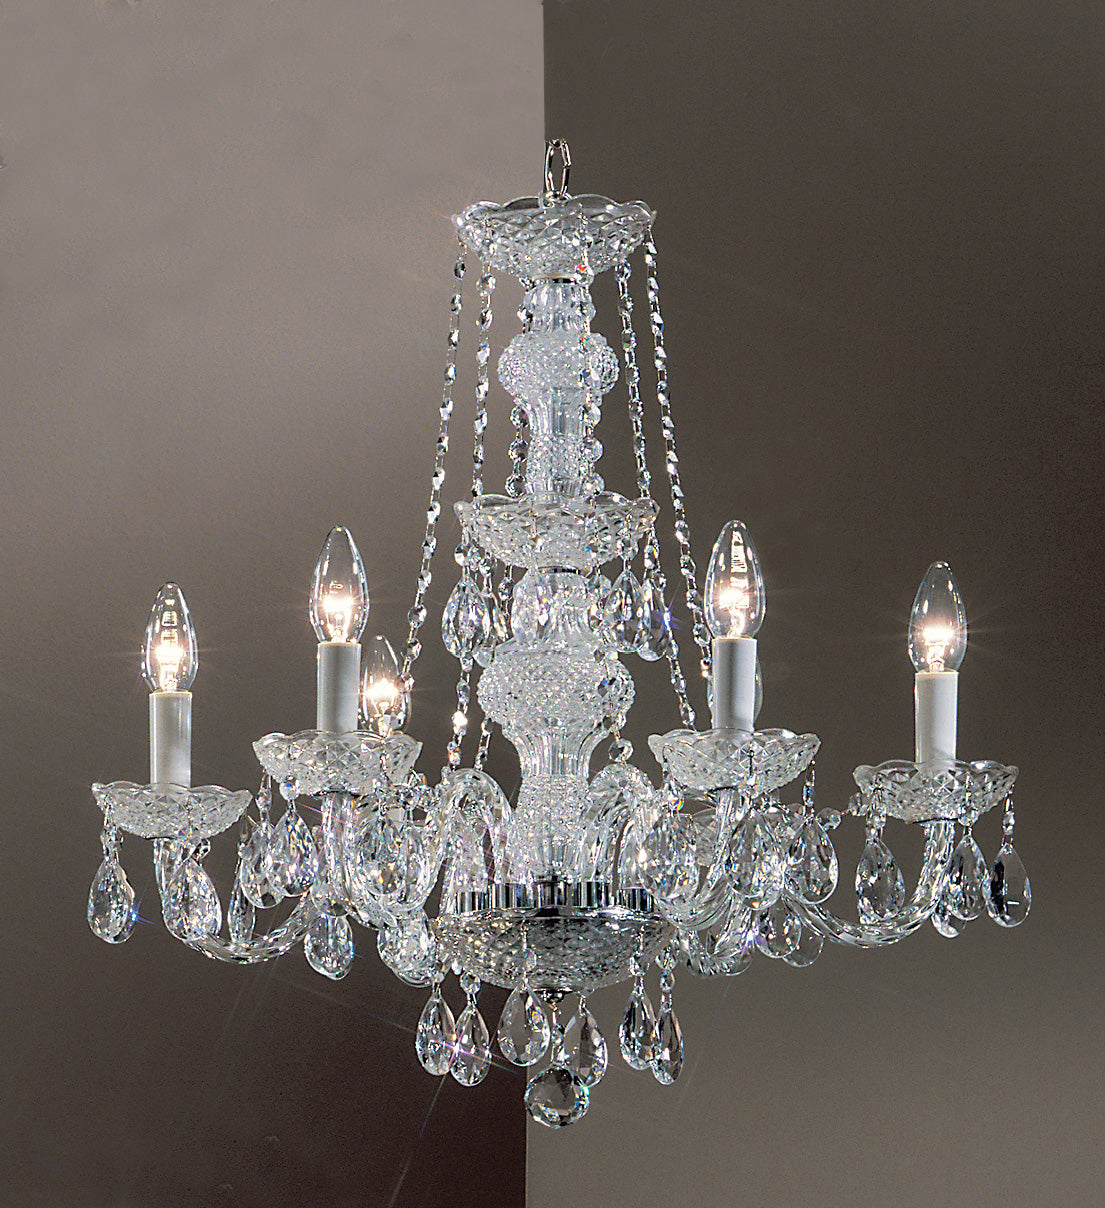 Classic Lighting 8236 CH I Monticello Crystal/Glass Chandelier in Chrome